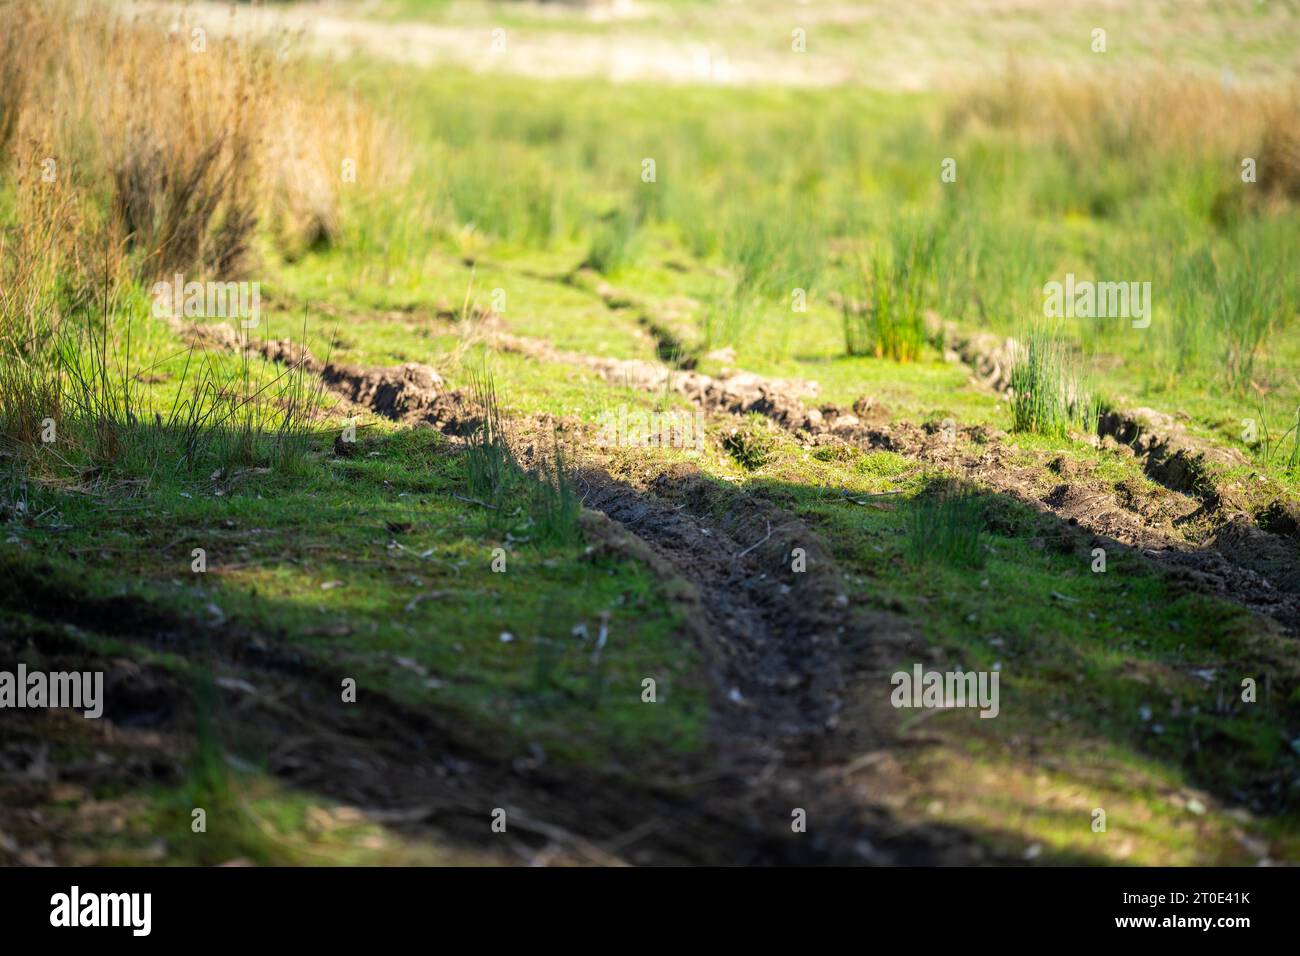 Hole with Muddy Water and Mud and Grass Stock Image - Image of grass,  nature: 175841205